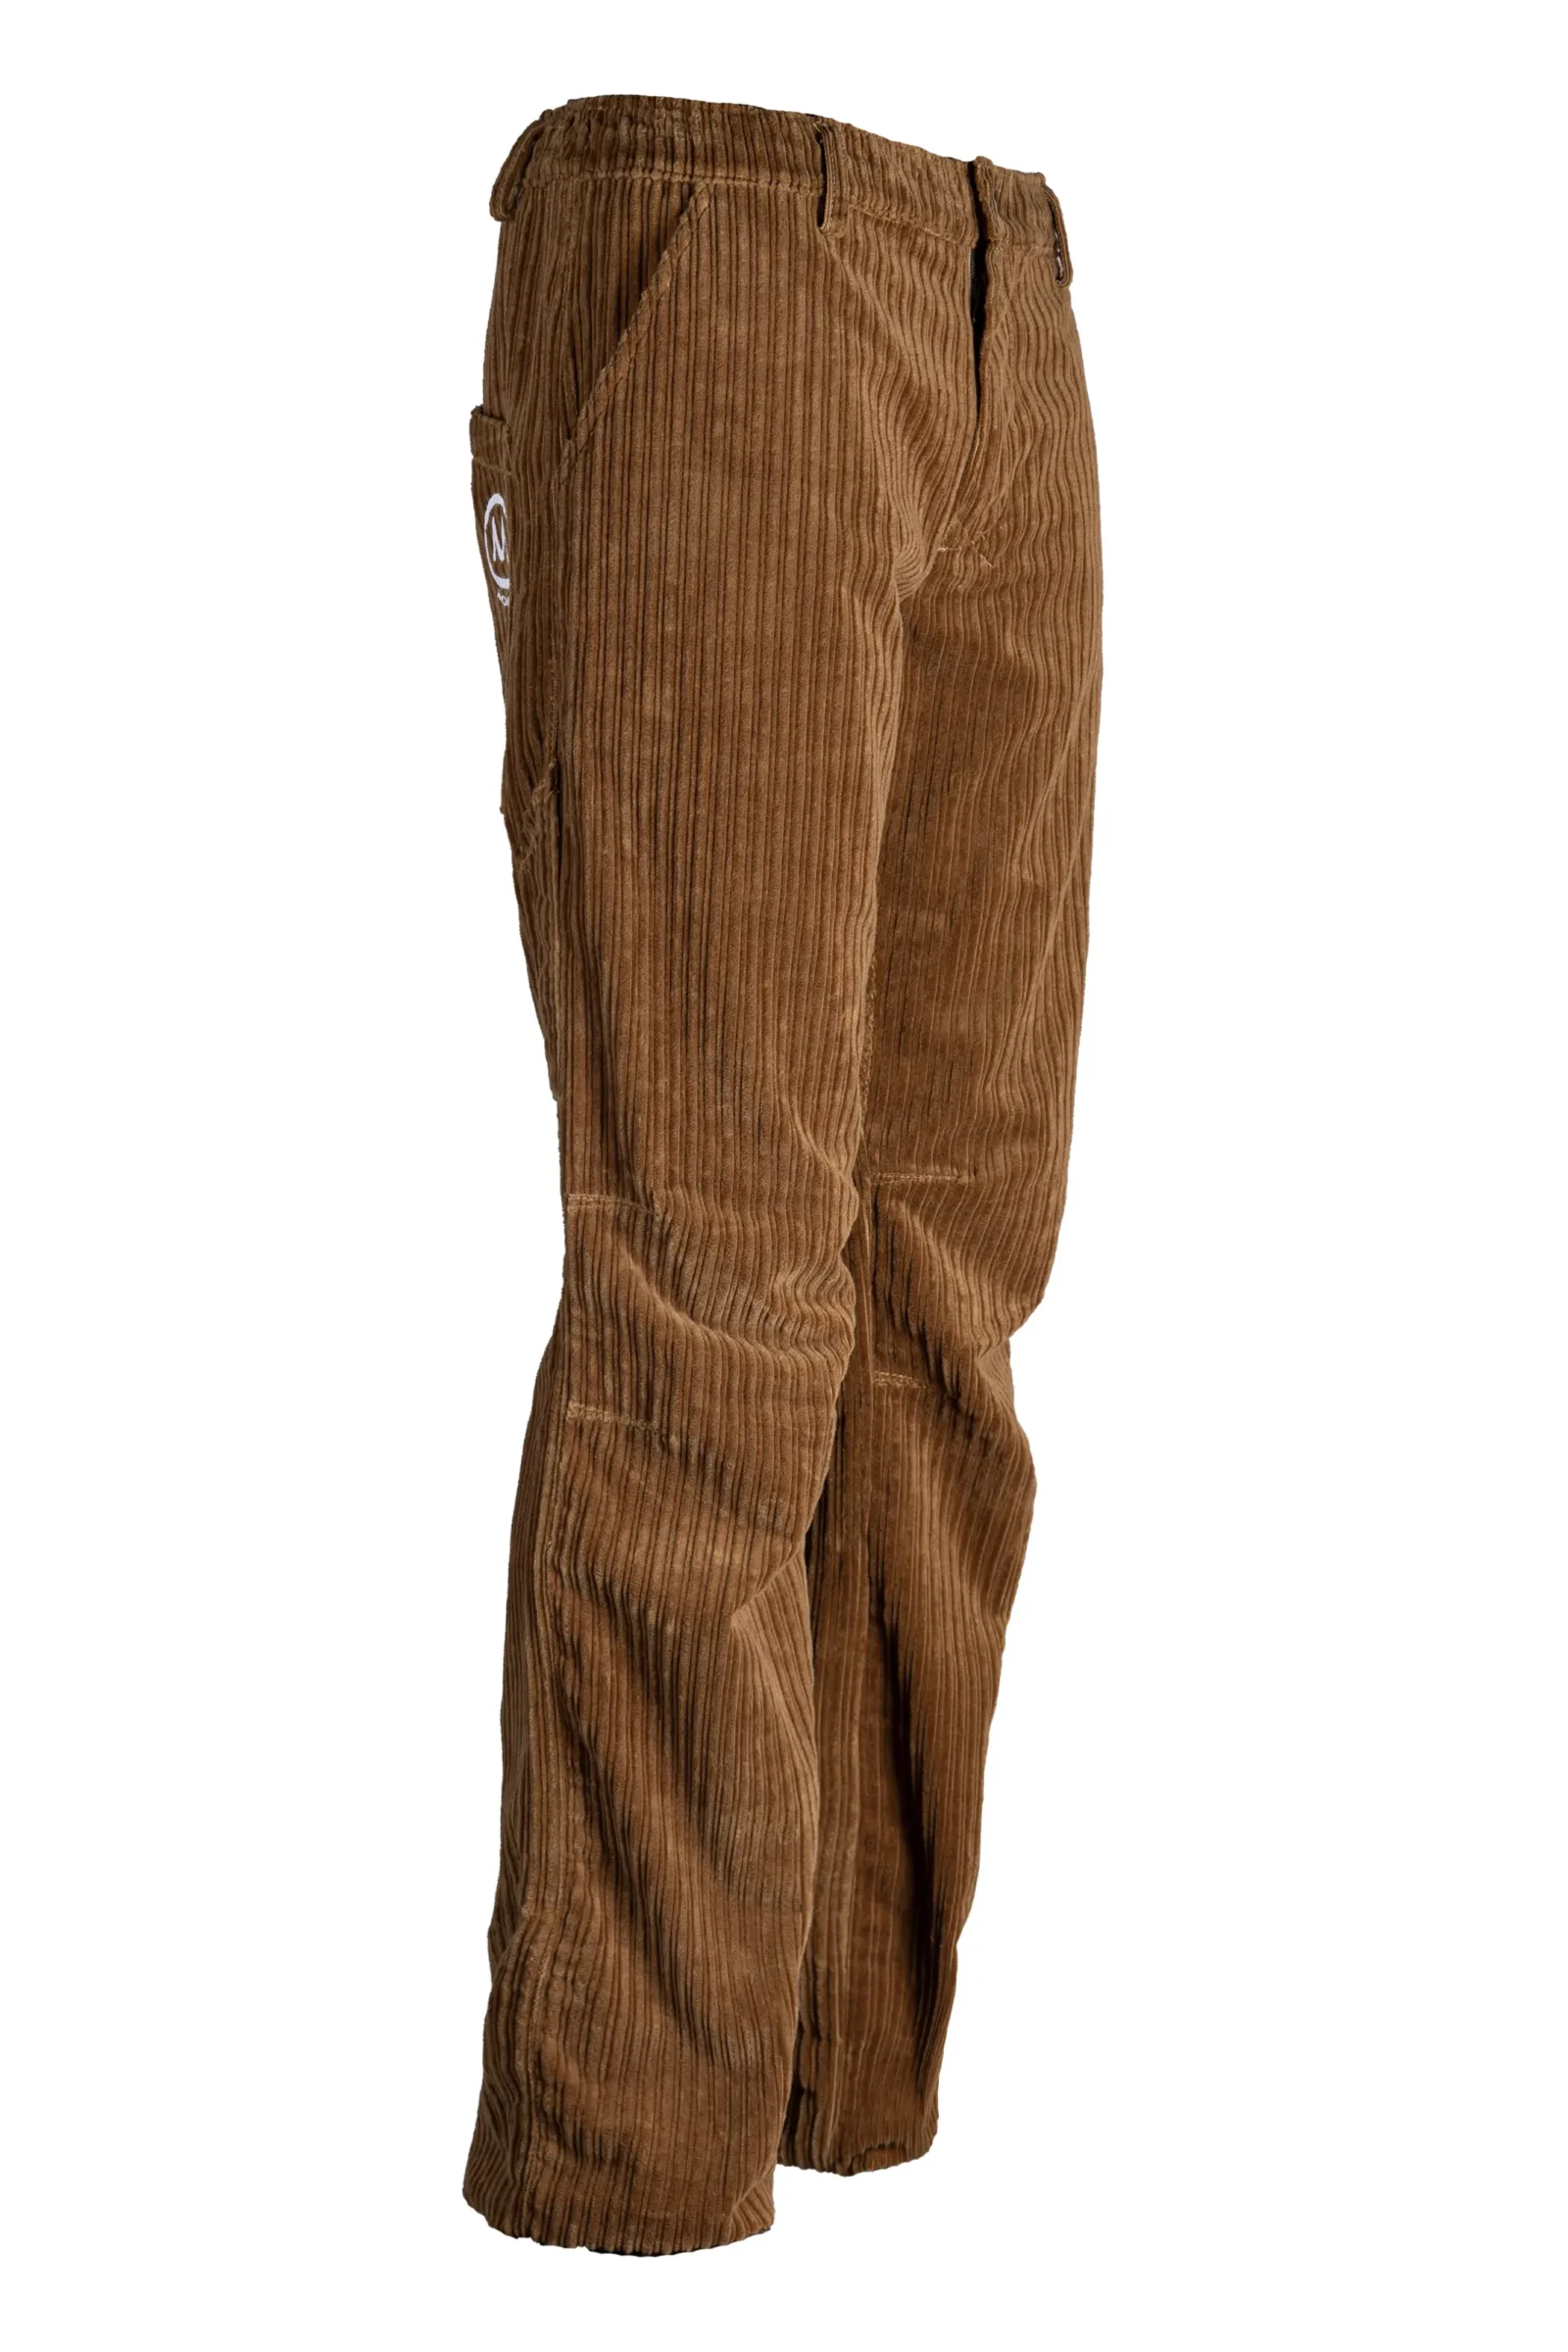 Men's trousers - light brown French corduroy - GRILLO MONVIC